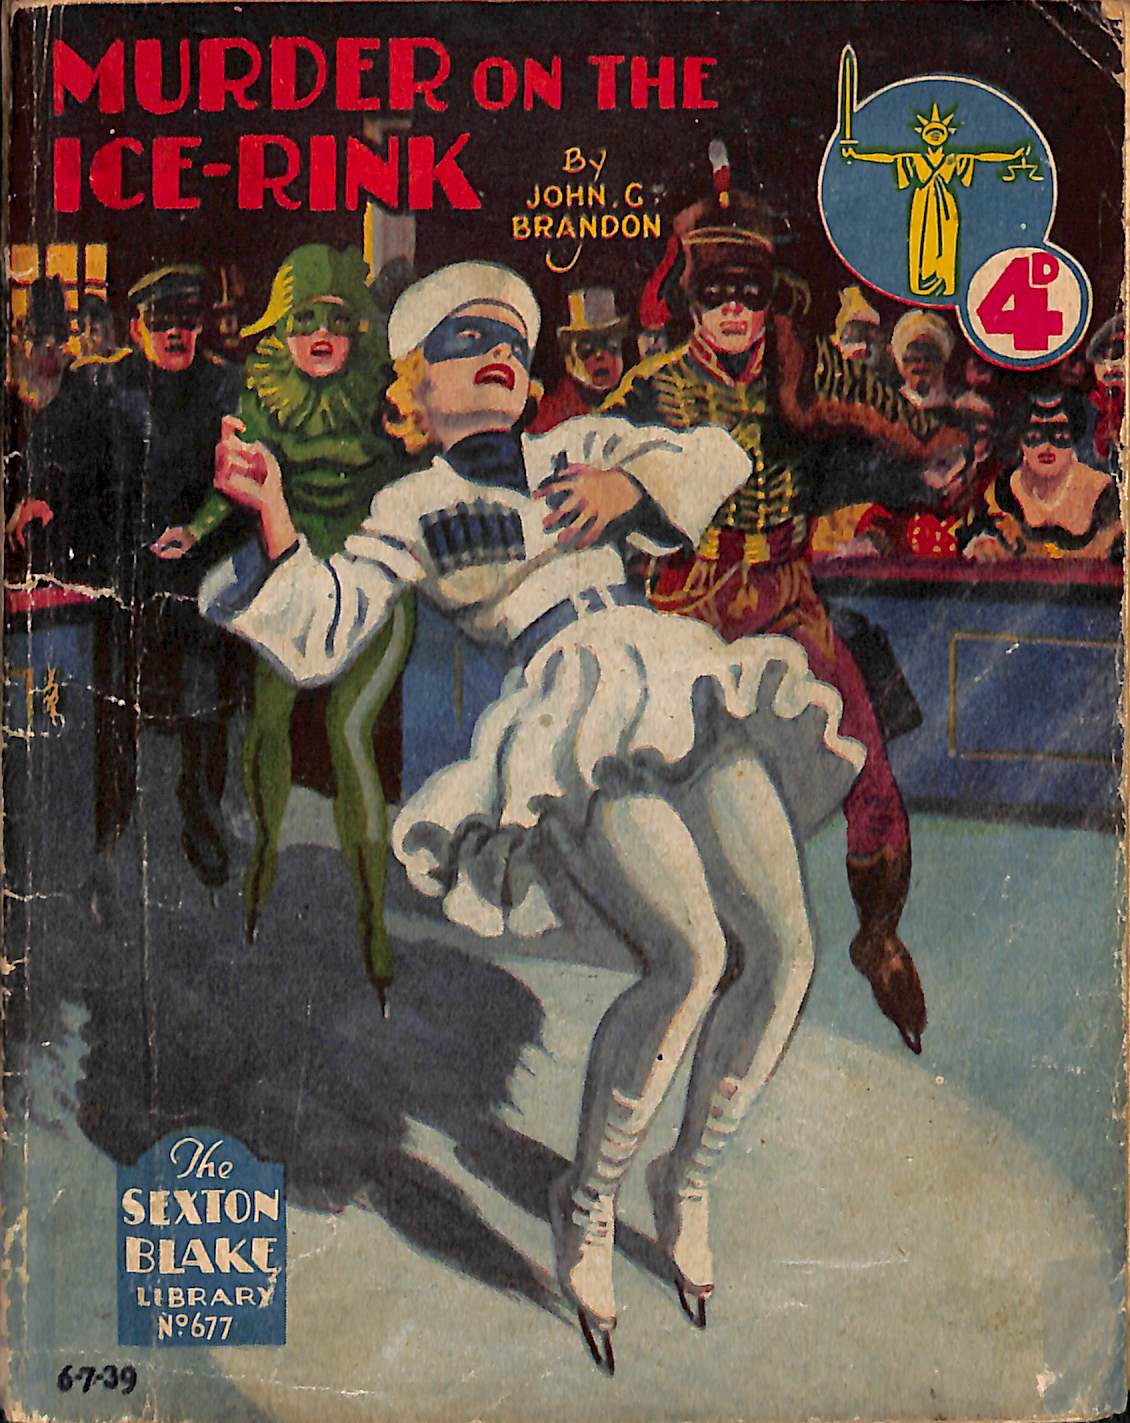 Book Cover For Sexton Blake Library S2 677 - Murder On the Ice-Rink